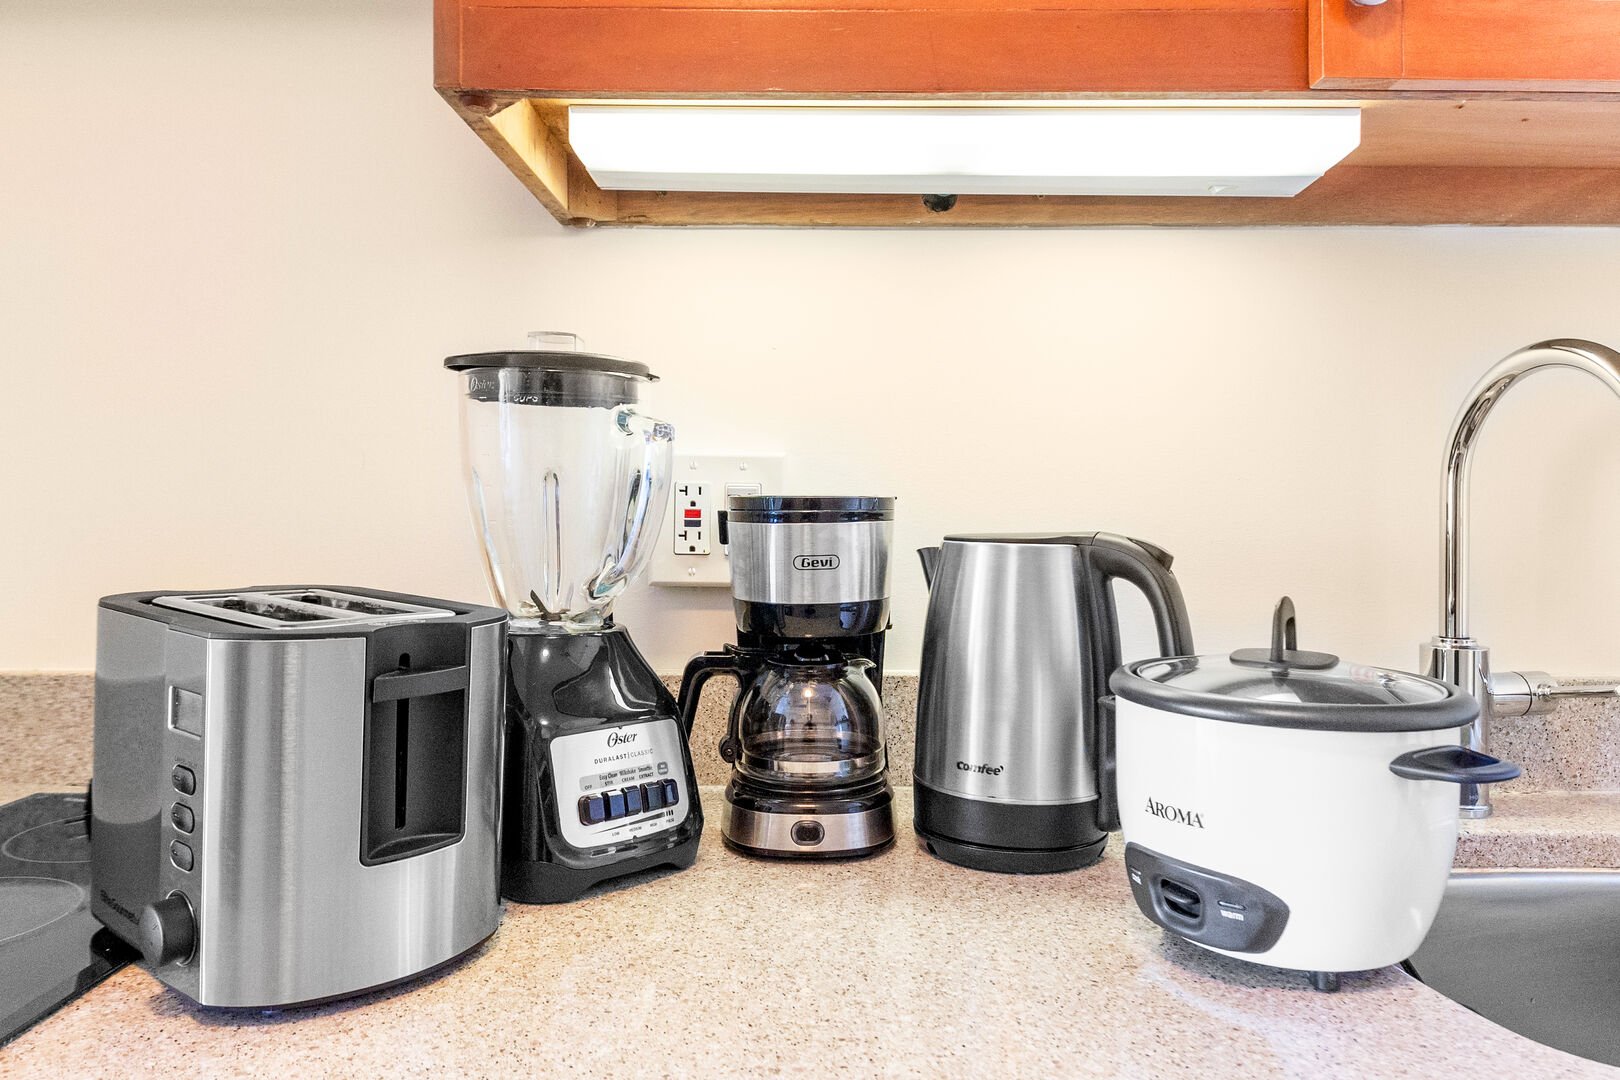 Available appliances include toaster, blender, coffee maker, tea kettle, and rice cooker